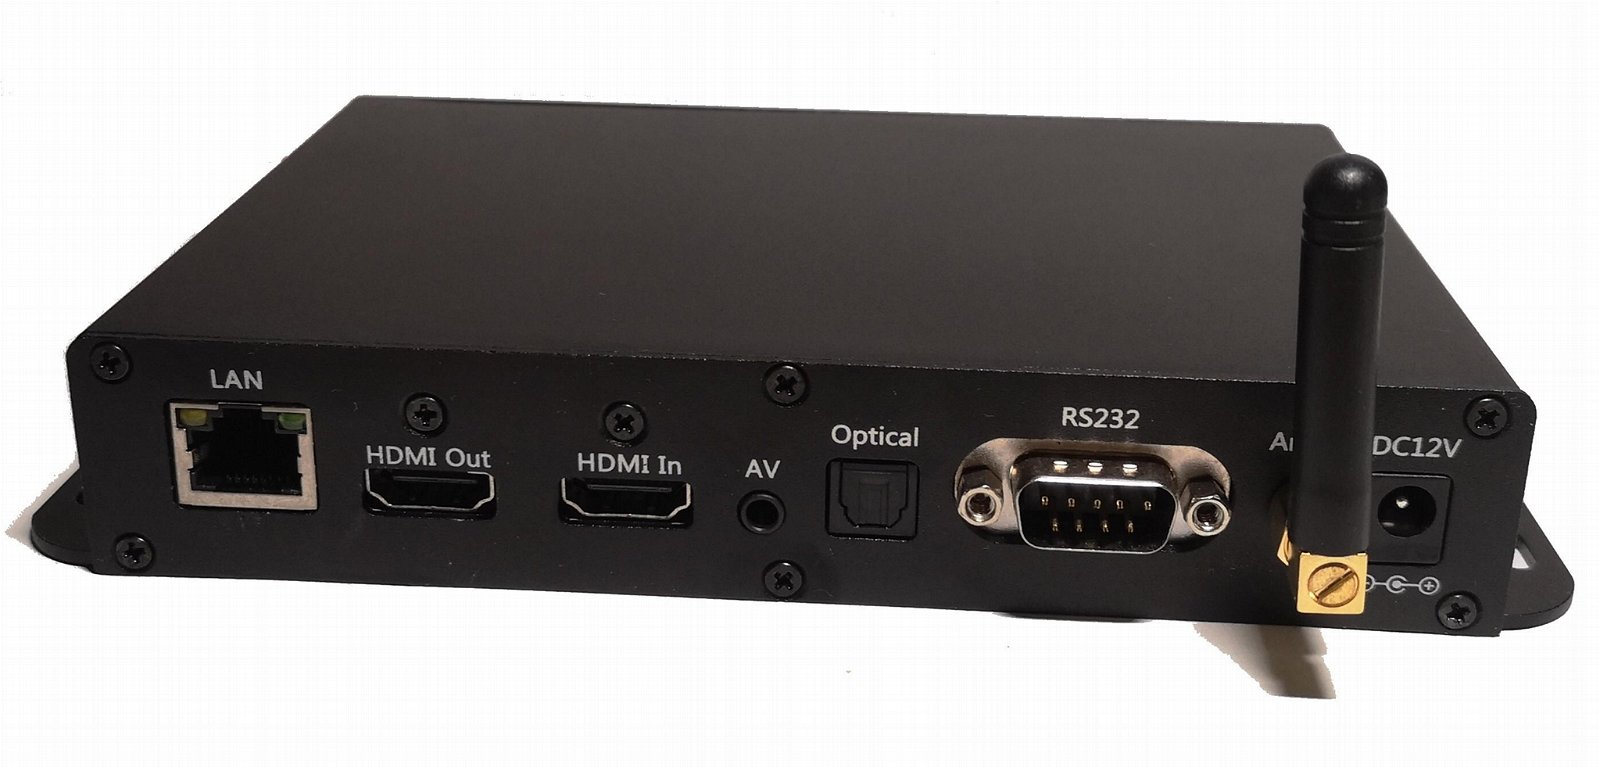  Network 4K 4096*2160P Player /communication RS232 serial command media file wor 2